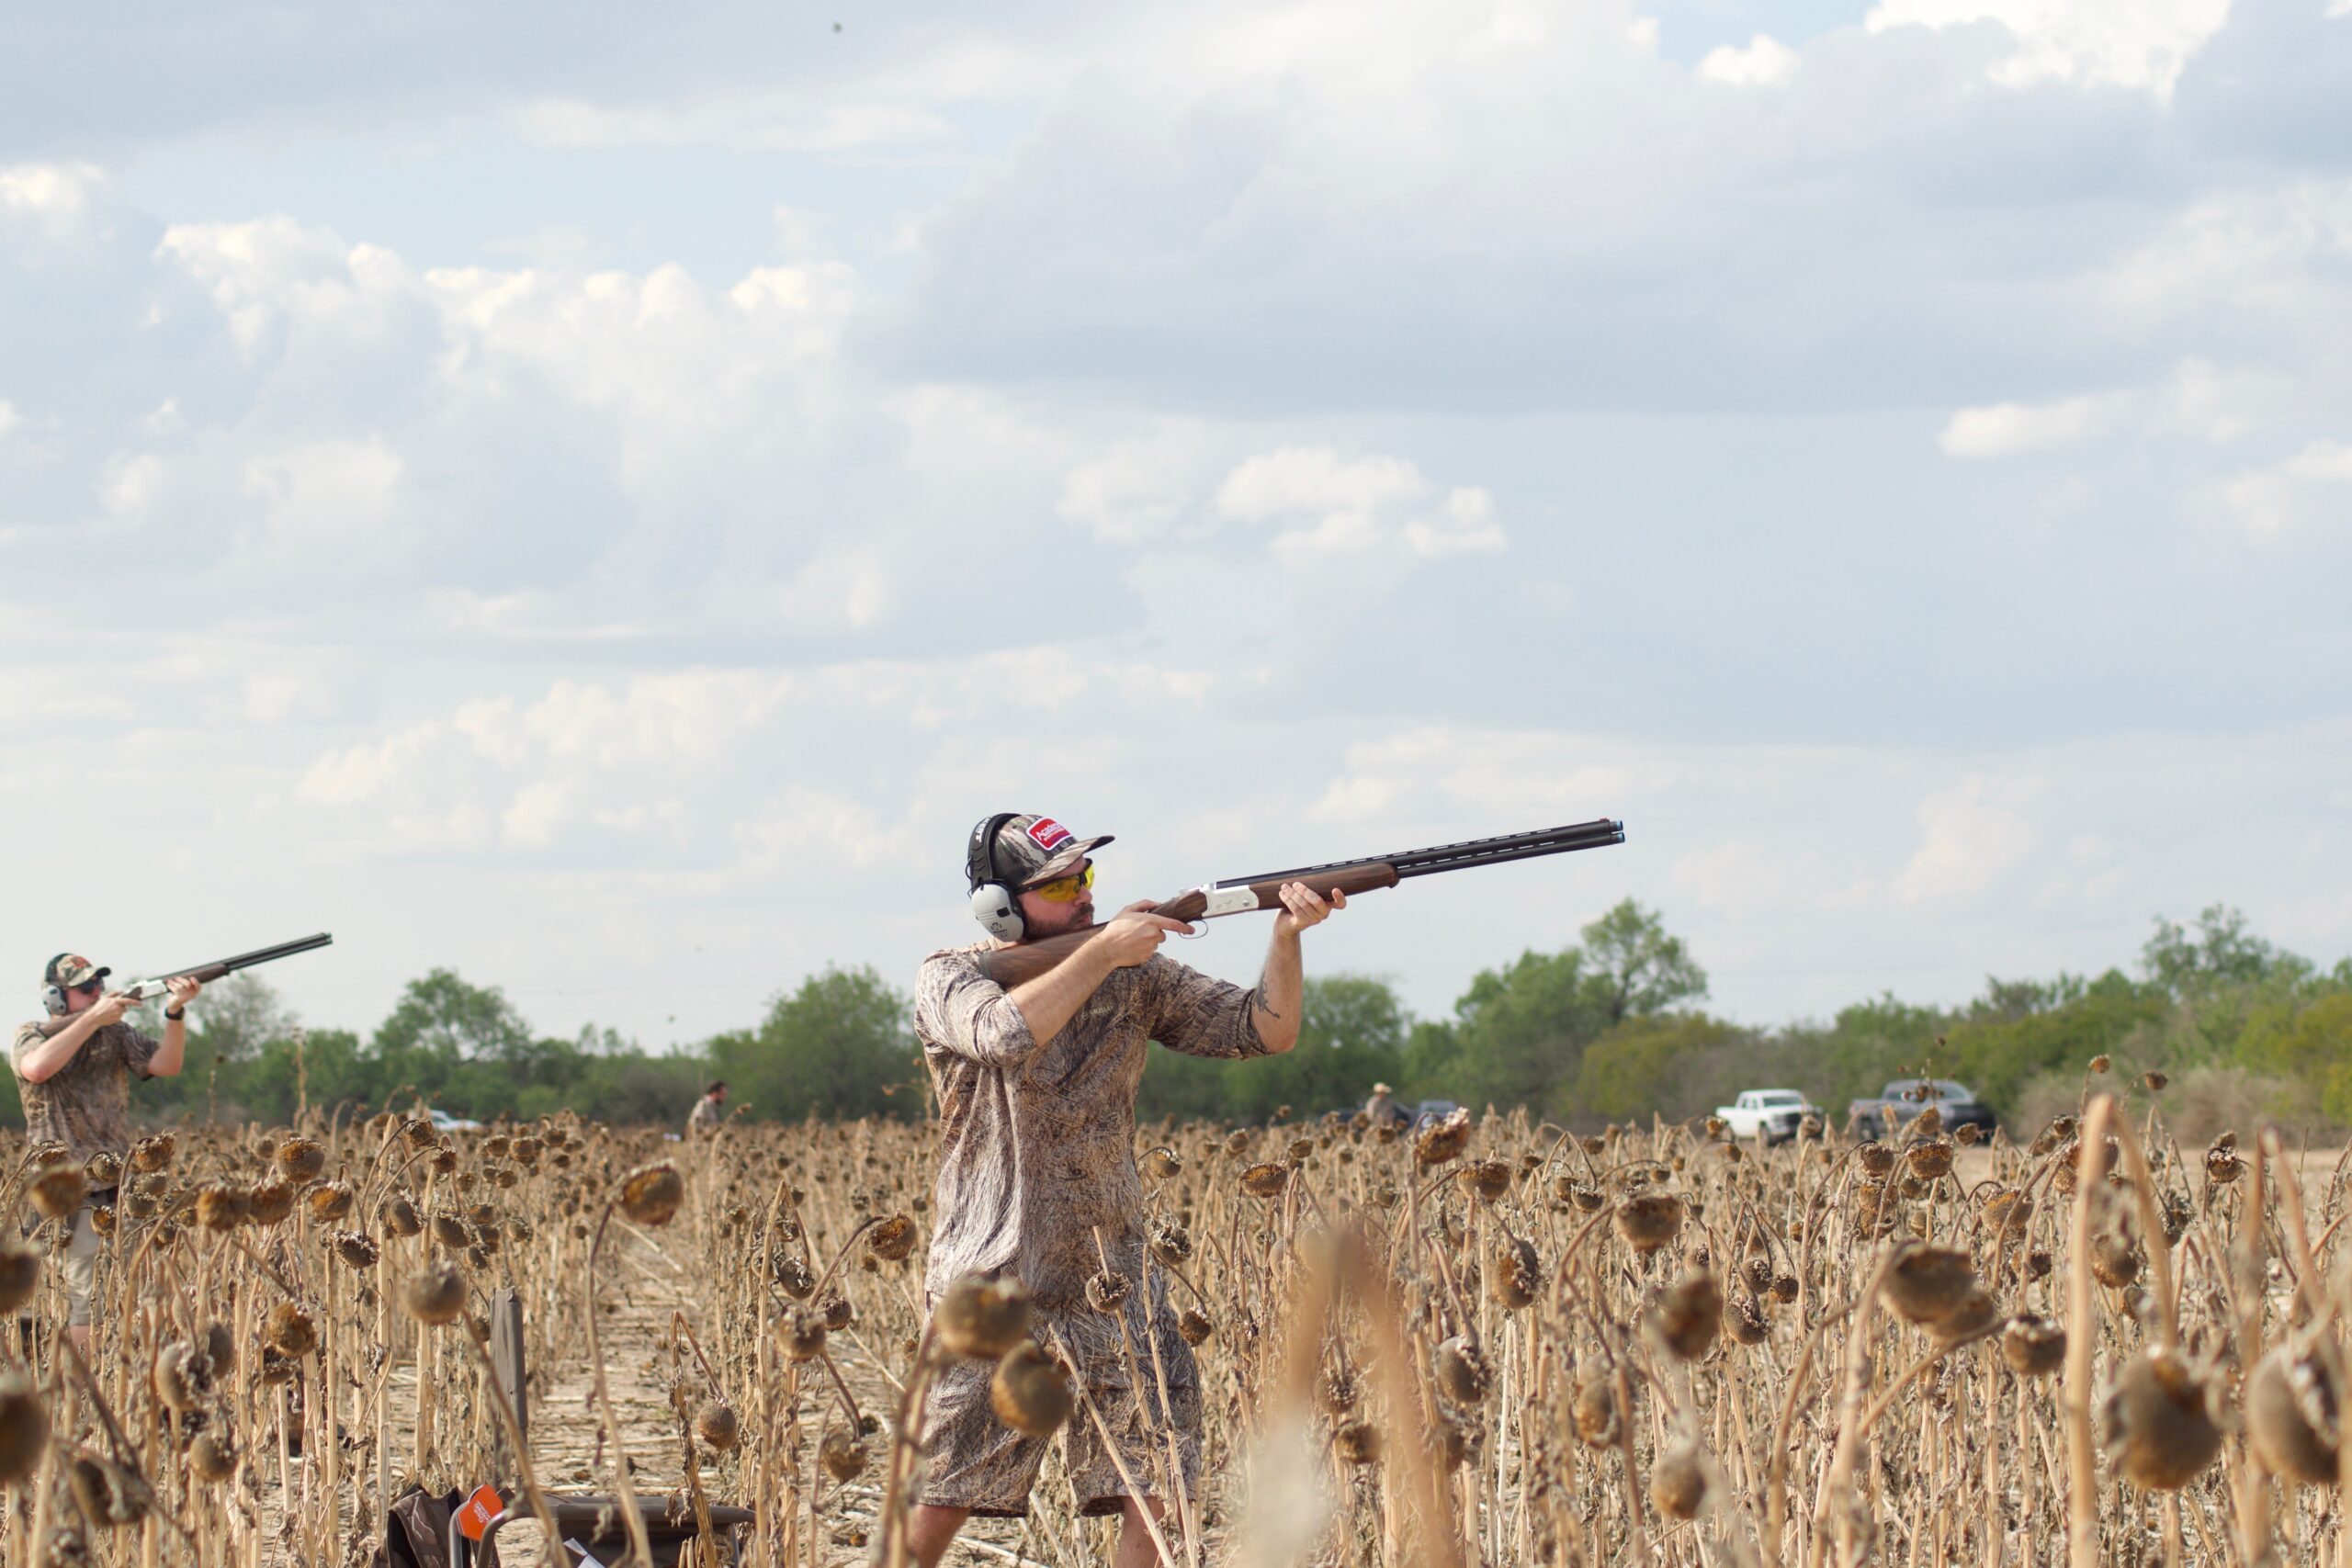 Private-land dove hunts can be done for a nominal fee.